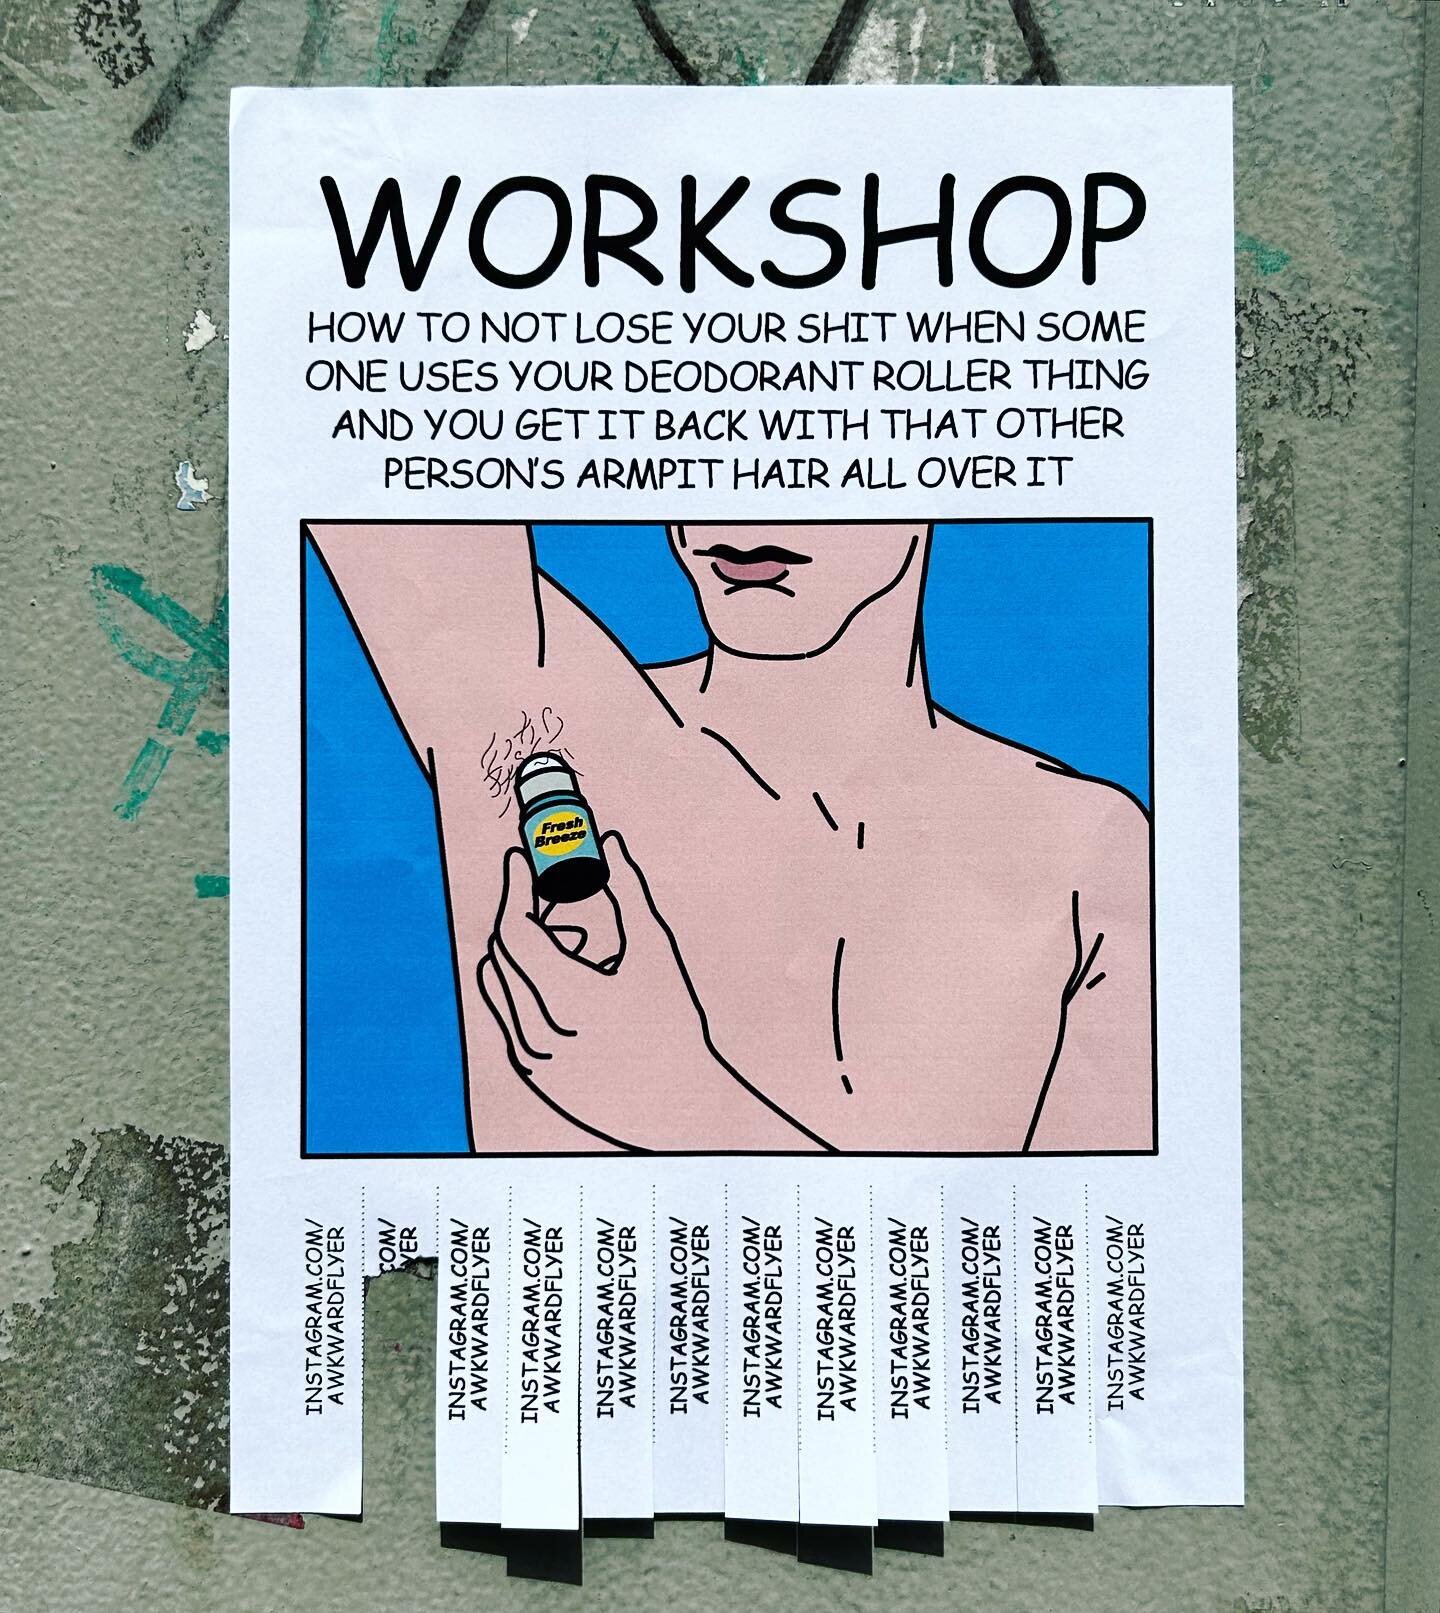 How not to lose your shit when someone returns your deo roller with armpit hair all over it..... #awkwardflyer #awkward #flyer #street #steetart #art #workshop #drawing #funny #haha #hilarious #joke #hahahaha #howto #diy